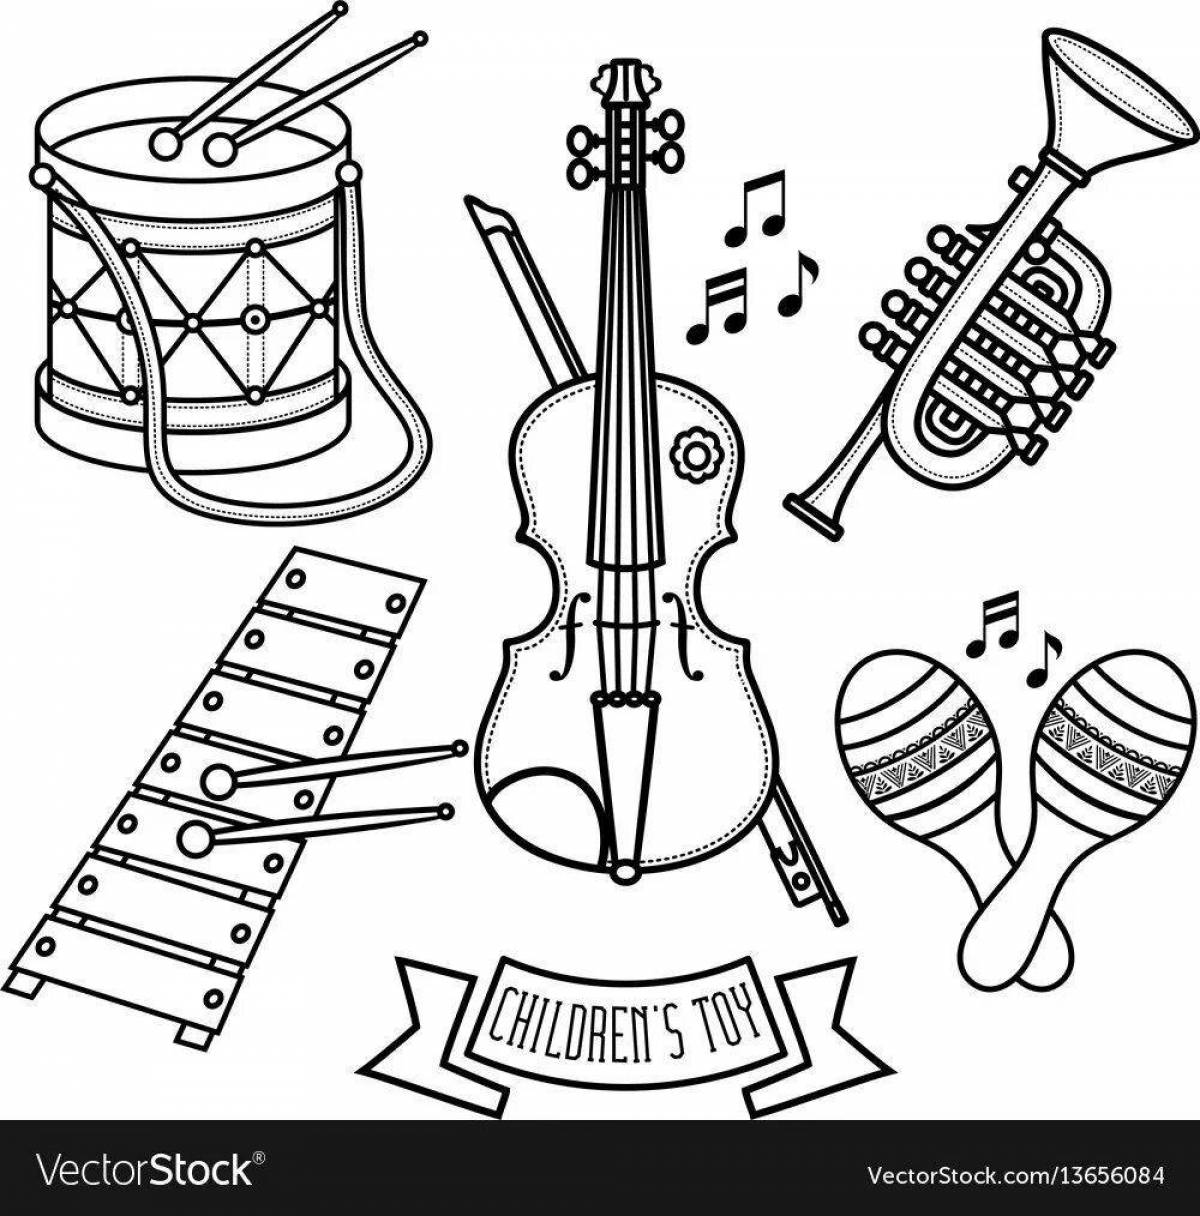 Outstanding folk musical instruments coloring pages for children